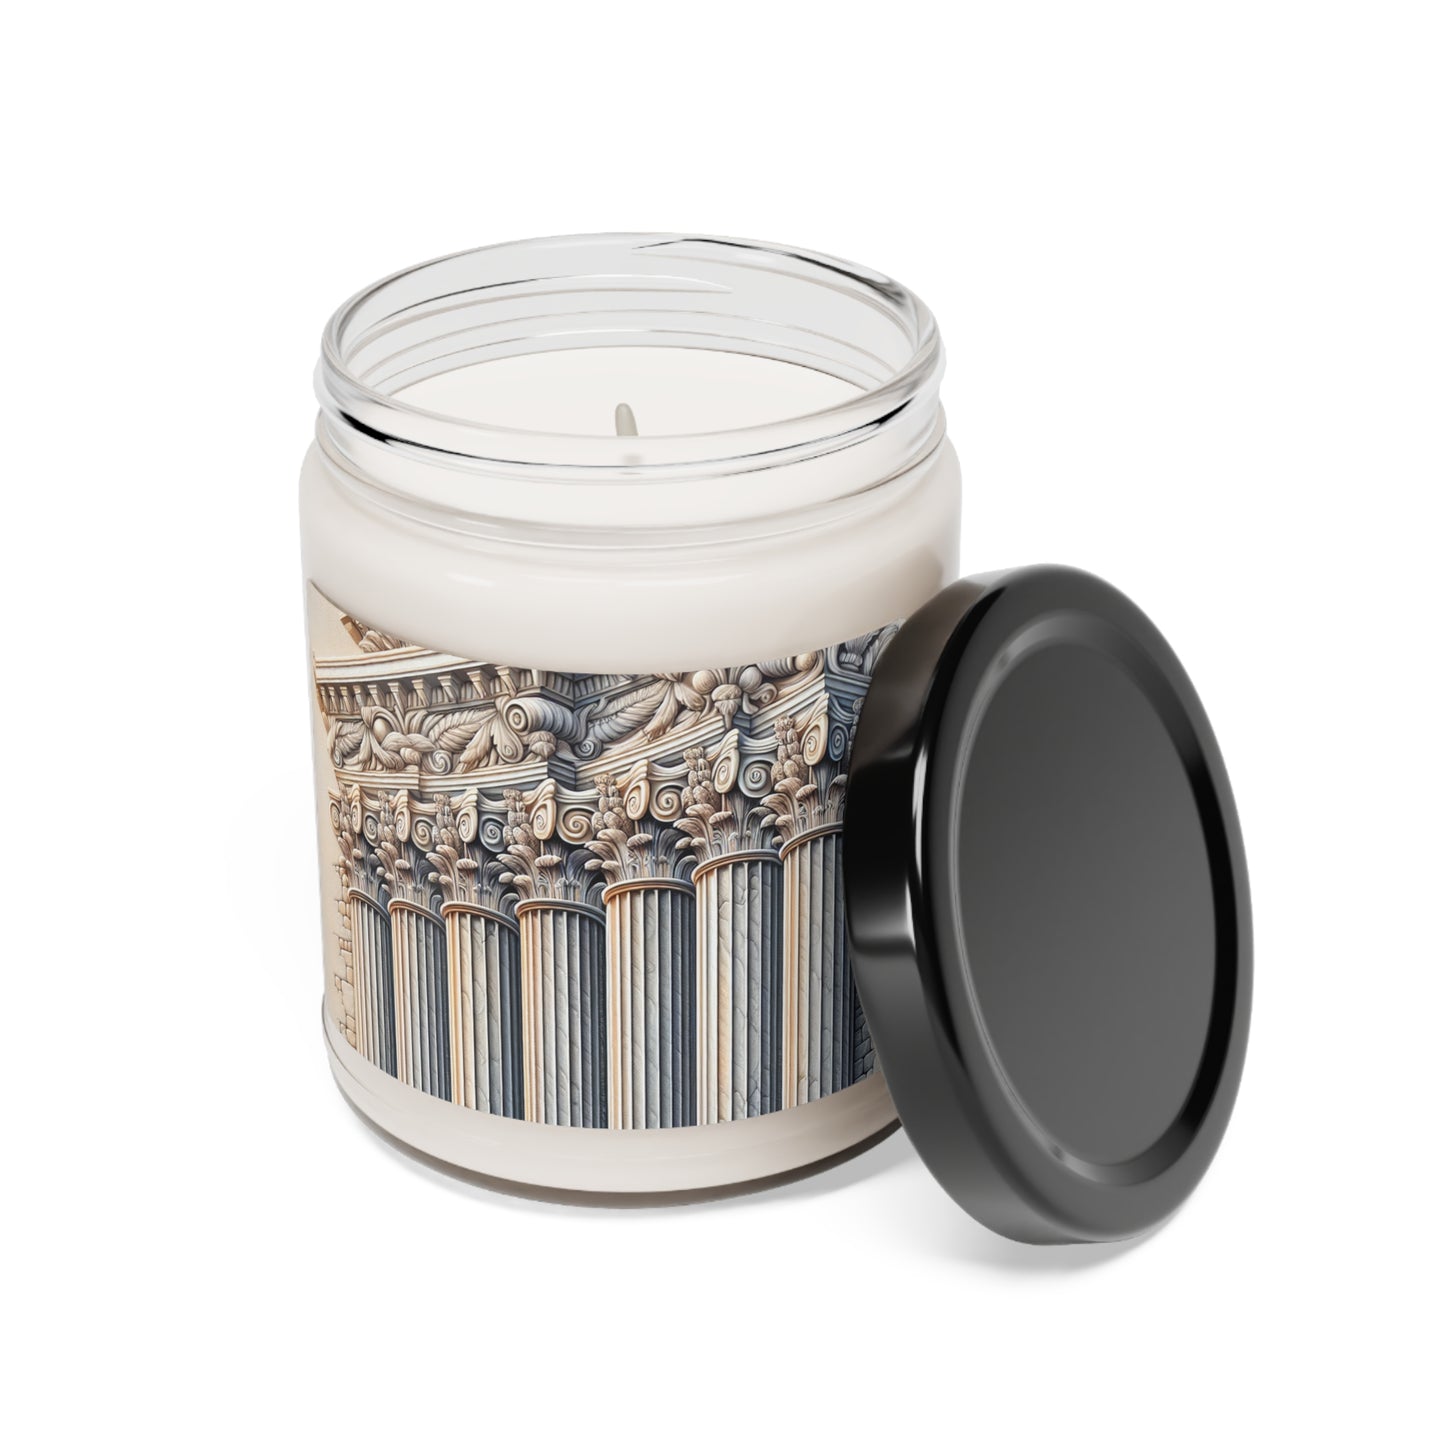 "3D Wall Columns: An Architectural Artpiece" - The Alien Scented Soy Candle 9oz Trompe-l'oeil Style